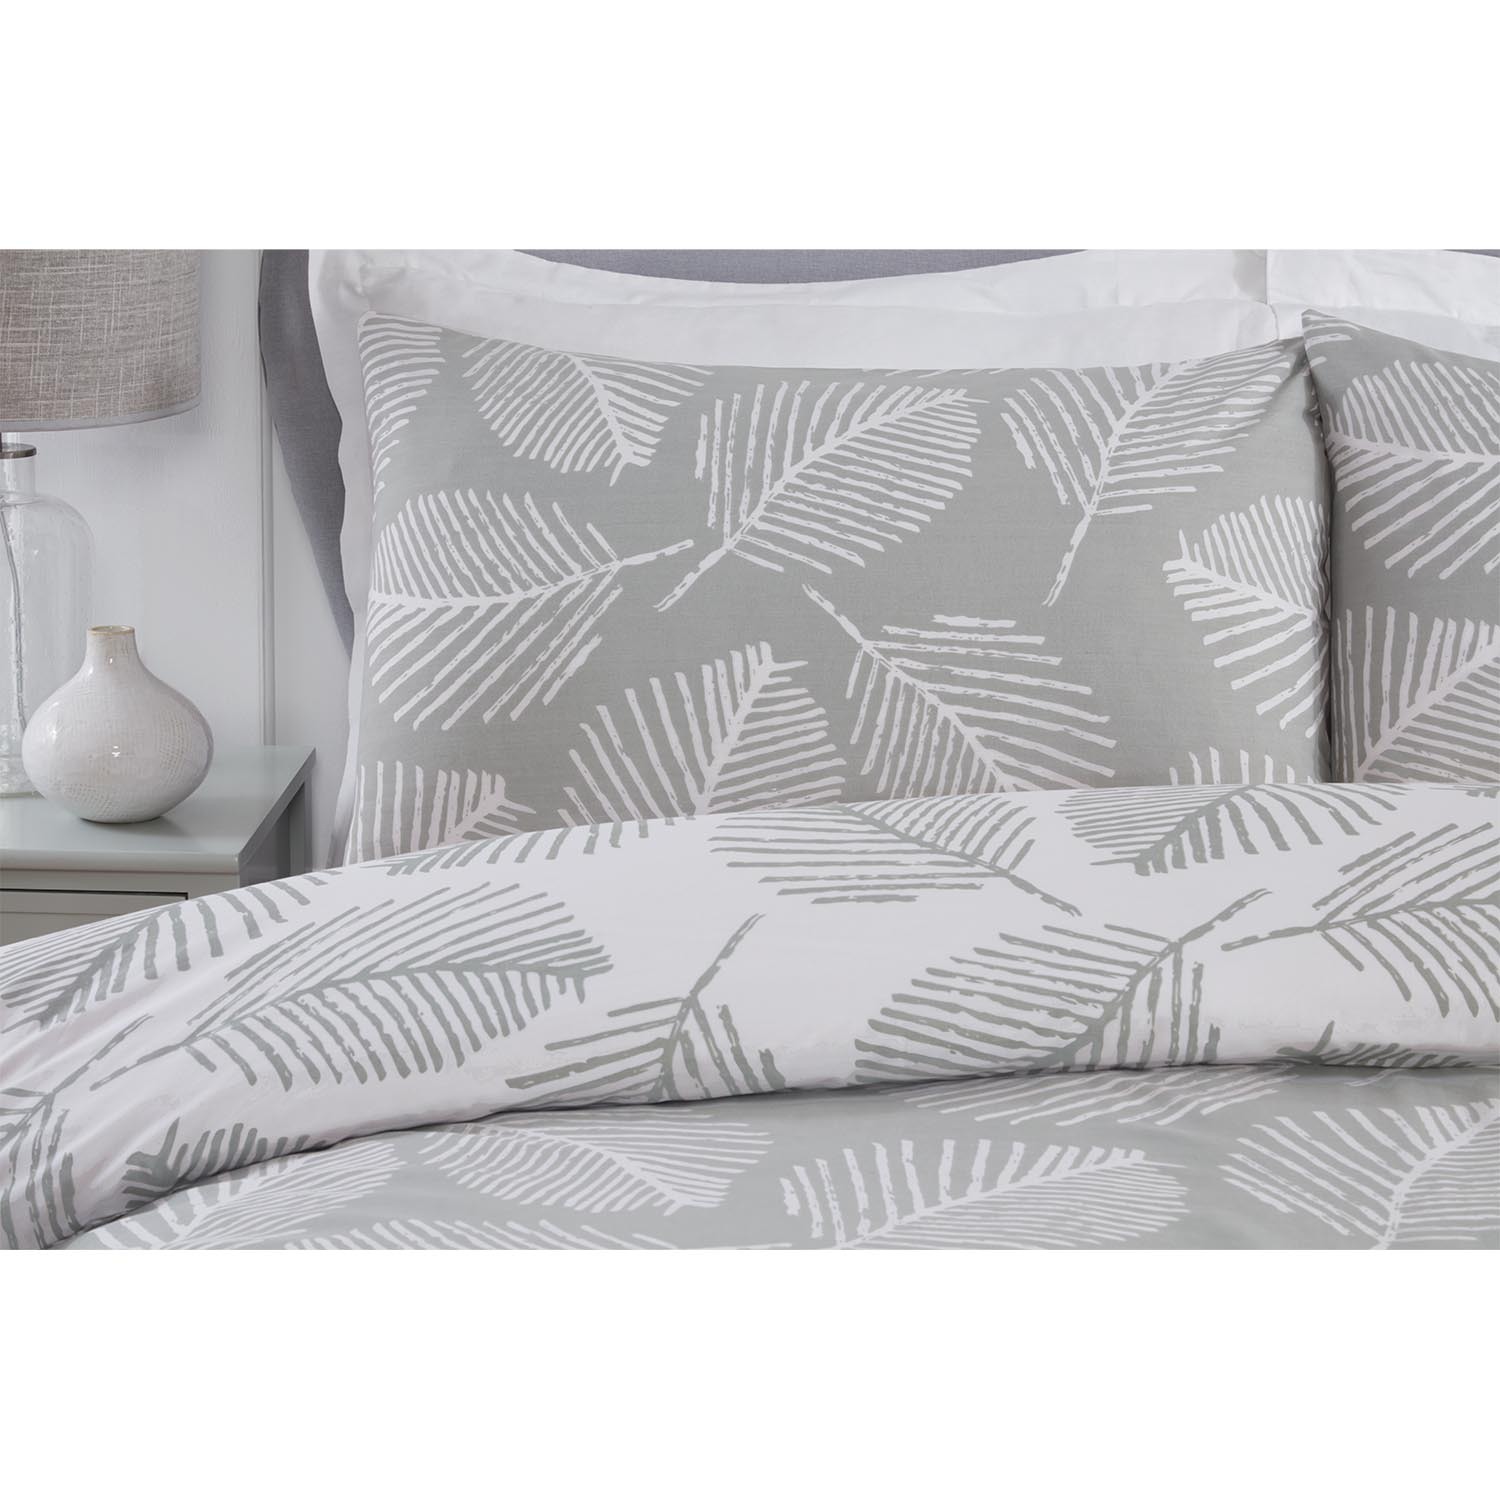 Falling Leaves Duvet Cover and Pillowcase Set - Green and White / Single Image 3